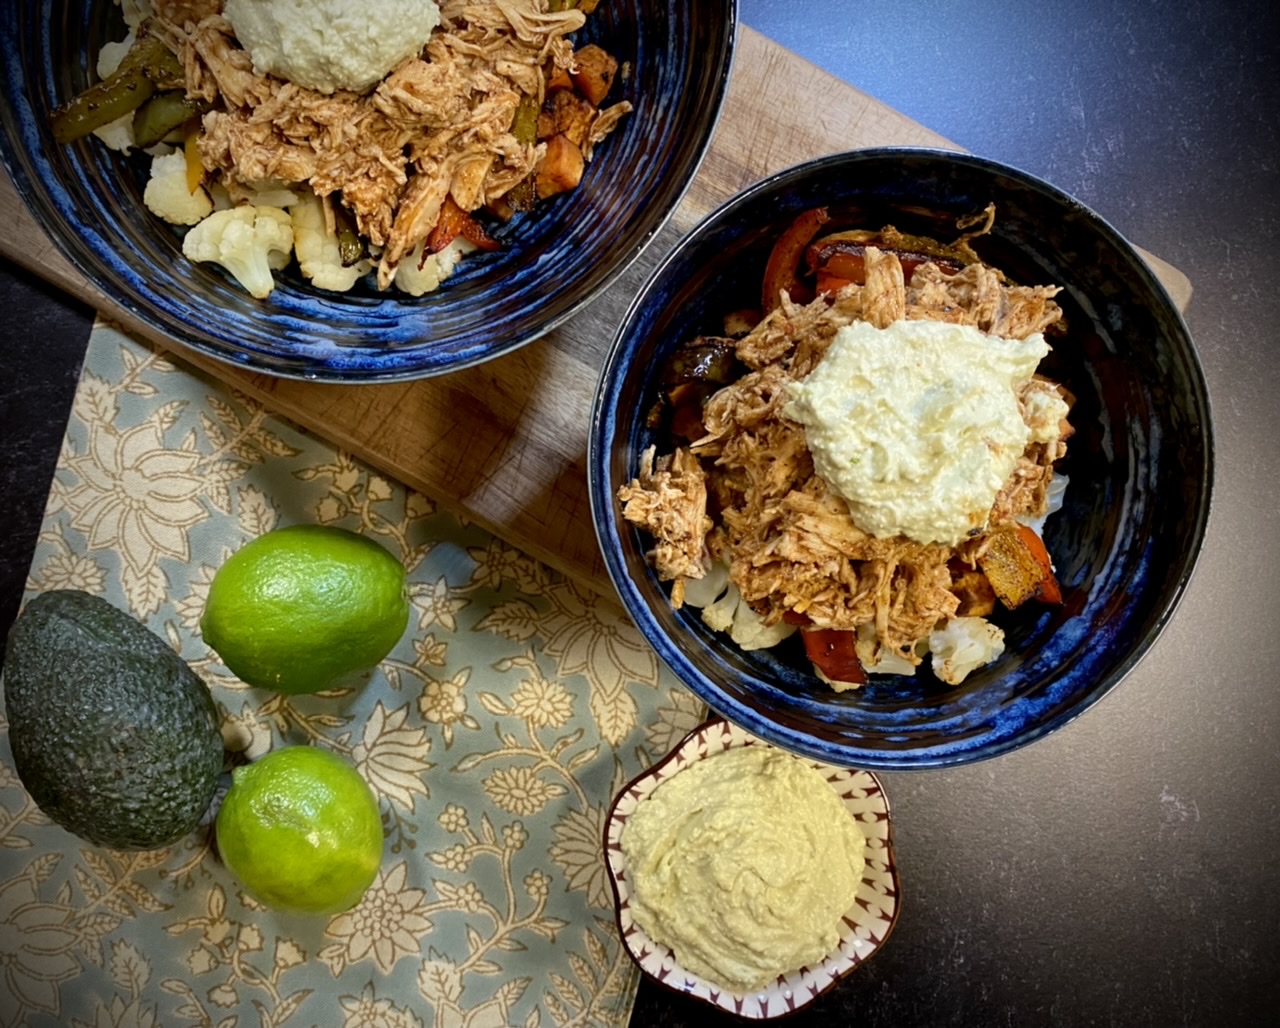 Enchilada chicken bowl in blue bowls on top of a towel next to limes and an avocado